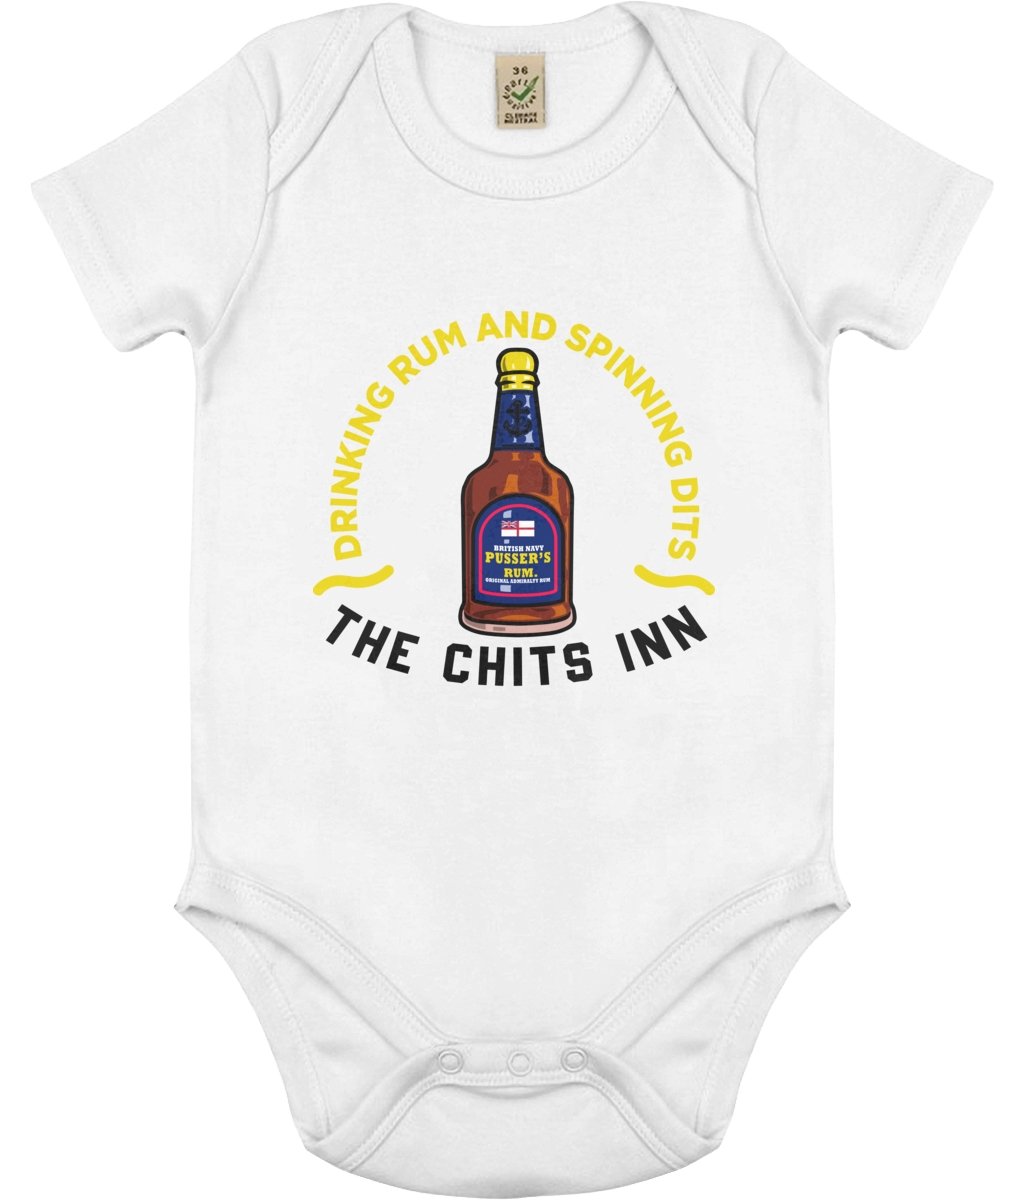 Babygrow for a Baby Sailor - The Chits Inn